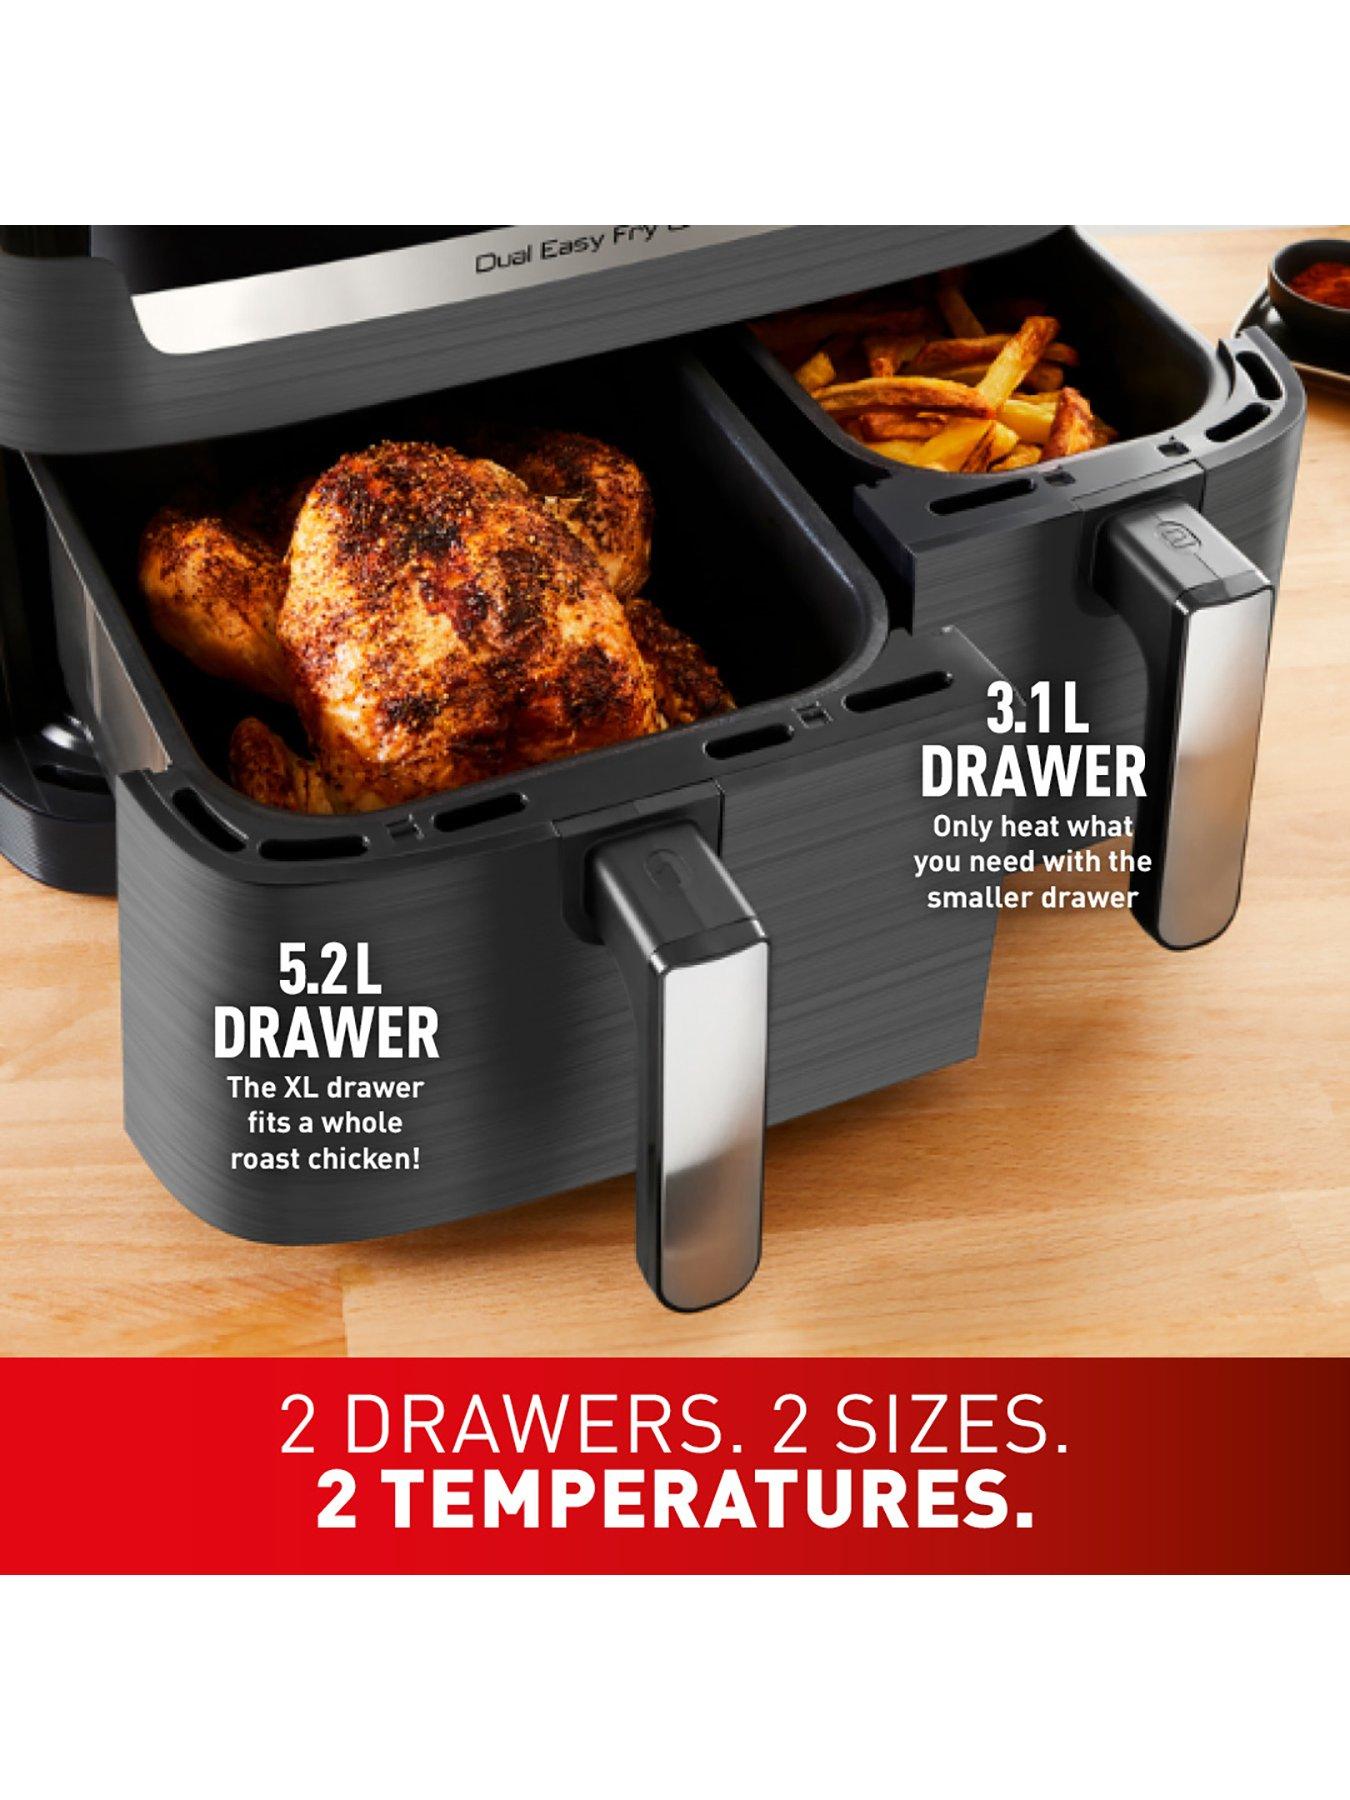 Easy Fry Dual Air Fryer & Grill EY905D40 - Stainless Steel, 8.3L